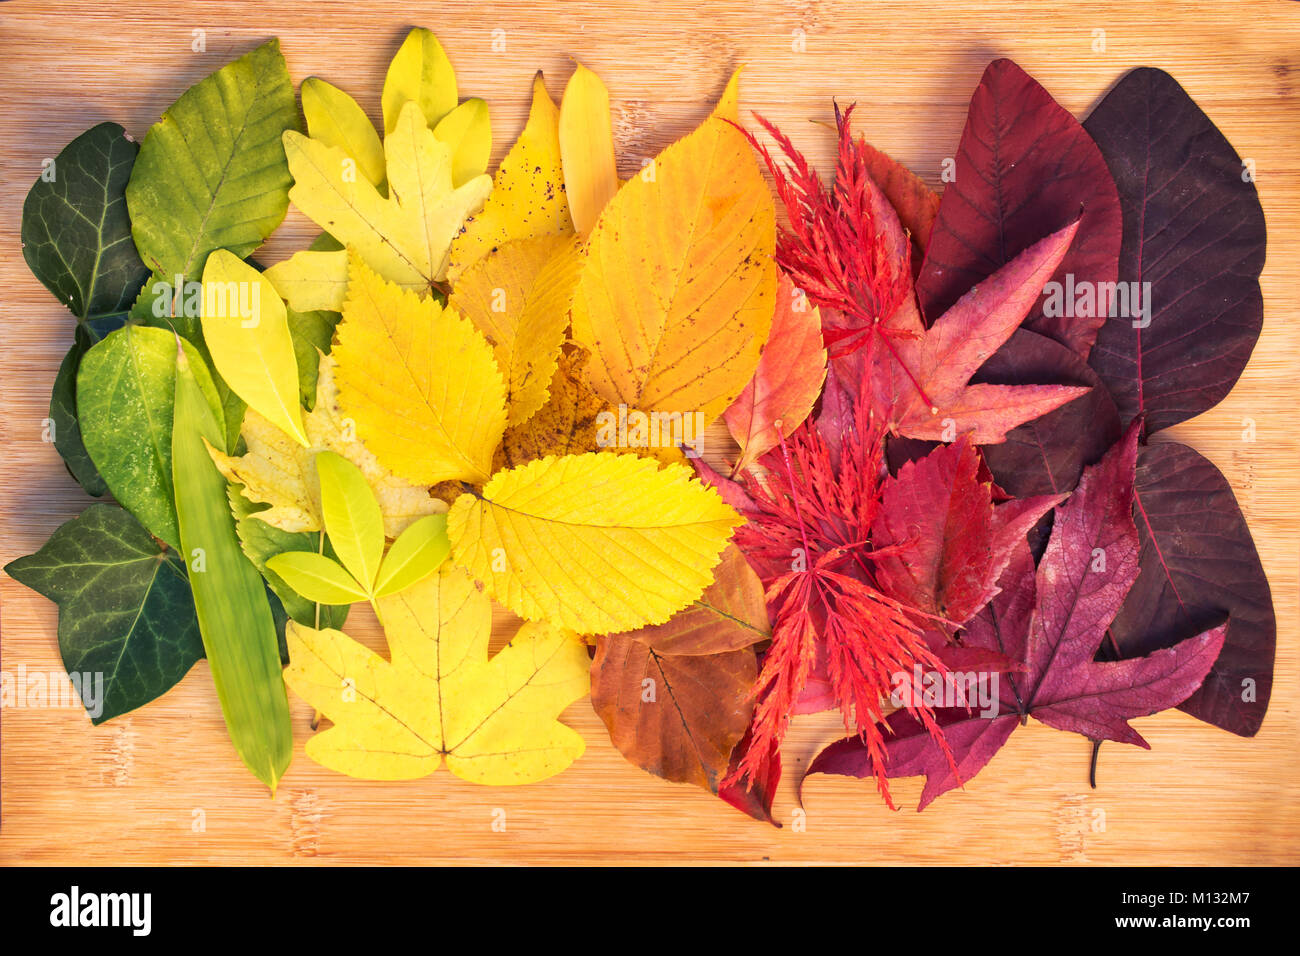 Rainbow of colorful autumnal leaves Stock Photo